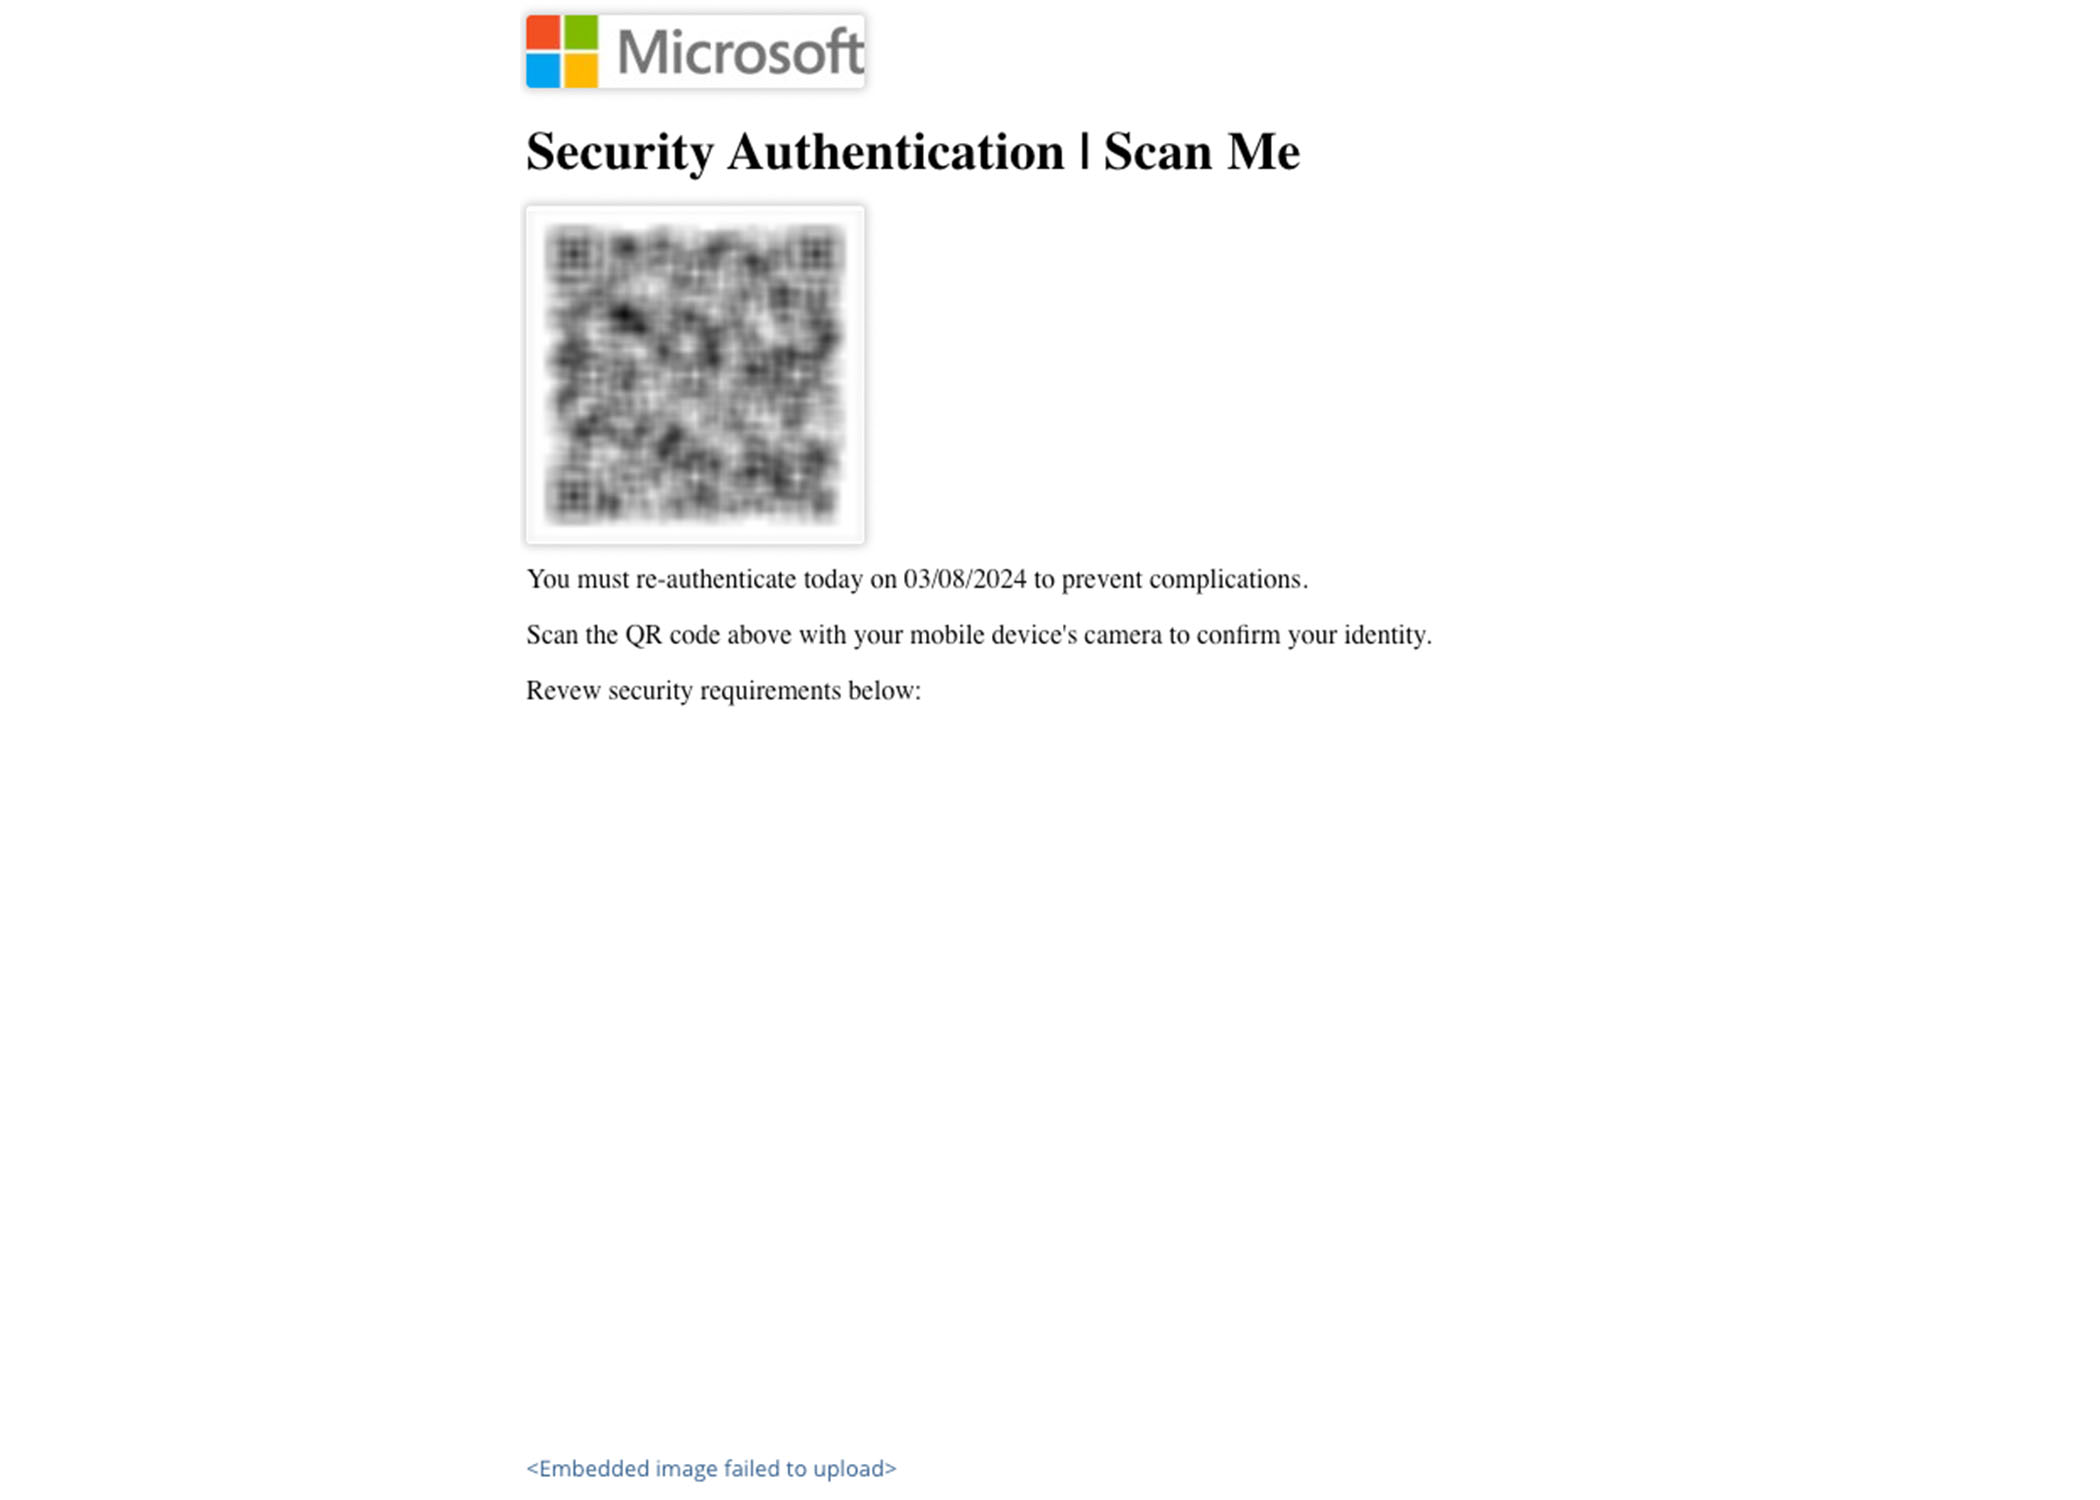 Screenshot of the Microsoft email with a blurred image of a QR code.